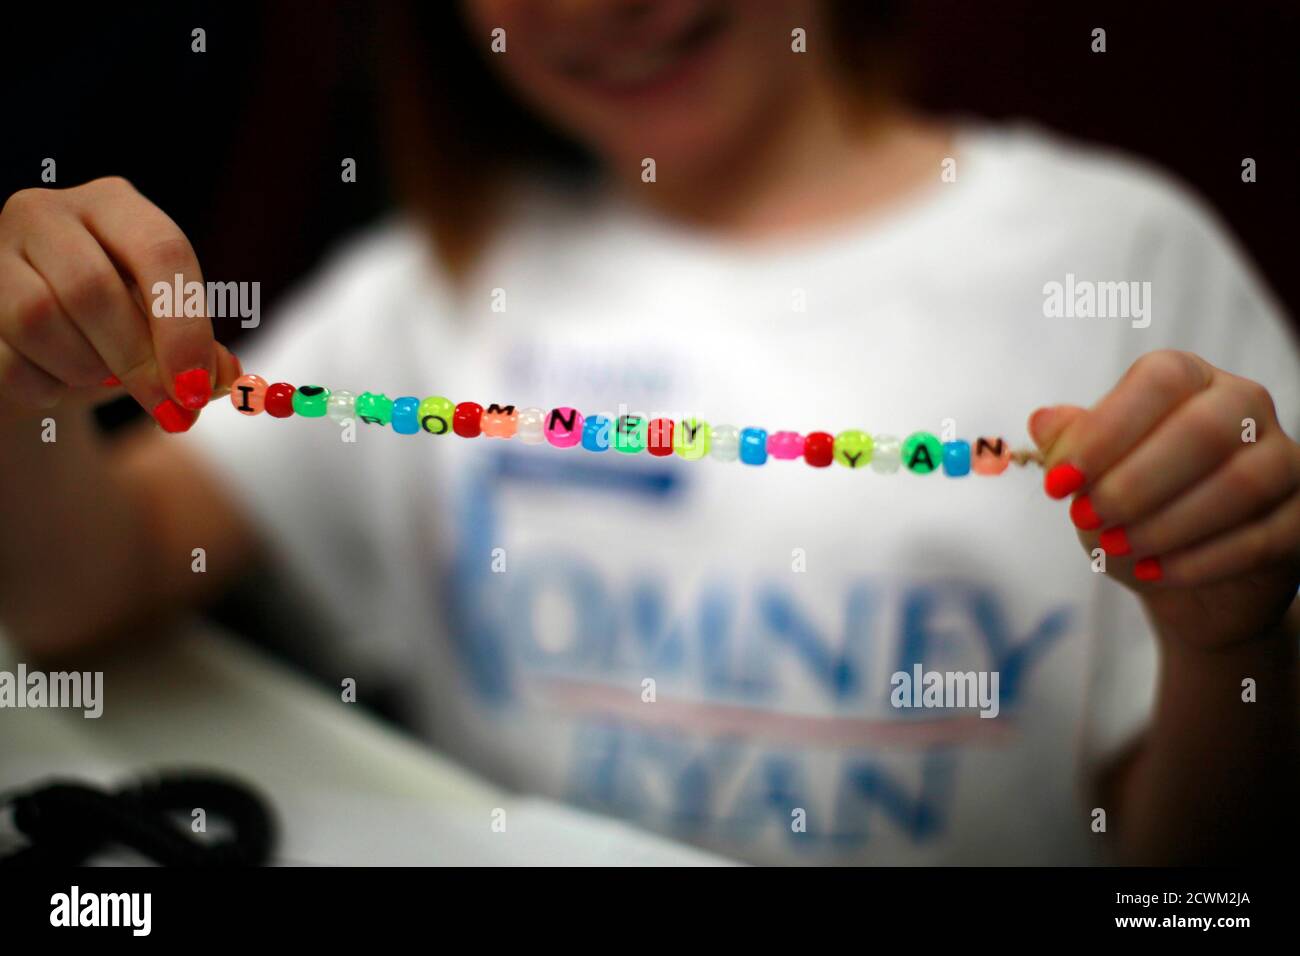 Claire Sorenson, 9, a volunteer making phone calls on behalf of U.S. Republican presidential candidate Mitt Romney, displays a bracelet she made at Romney's headquarters in Lakewood, Colorado October 30, 2012. The U.S. presidential election is exactly one week away. REUTERS/Rick Wilking (UNITED STATES - Tags: POLITICS ELECTIONS USA PRESIDENTIAL ELECTION) Stock Photo